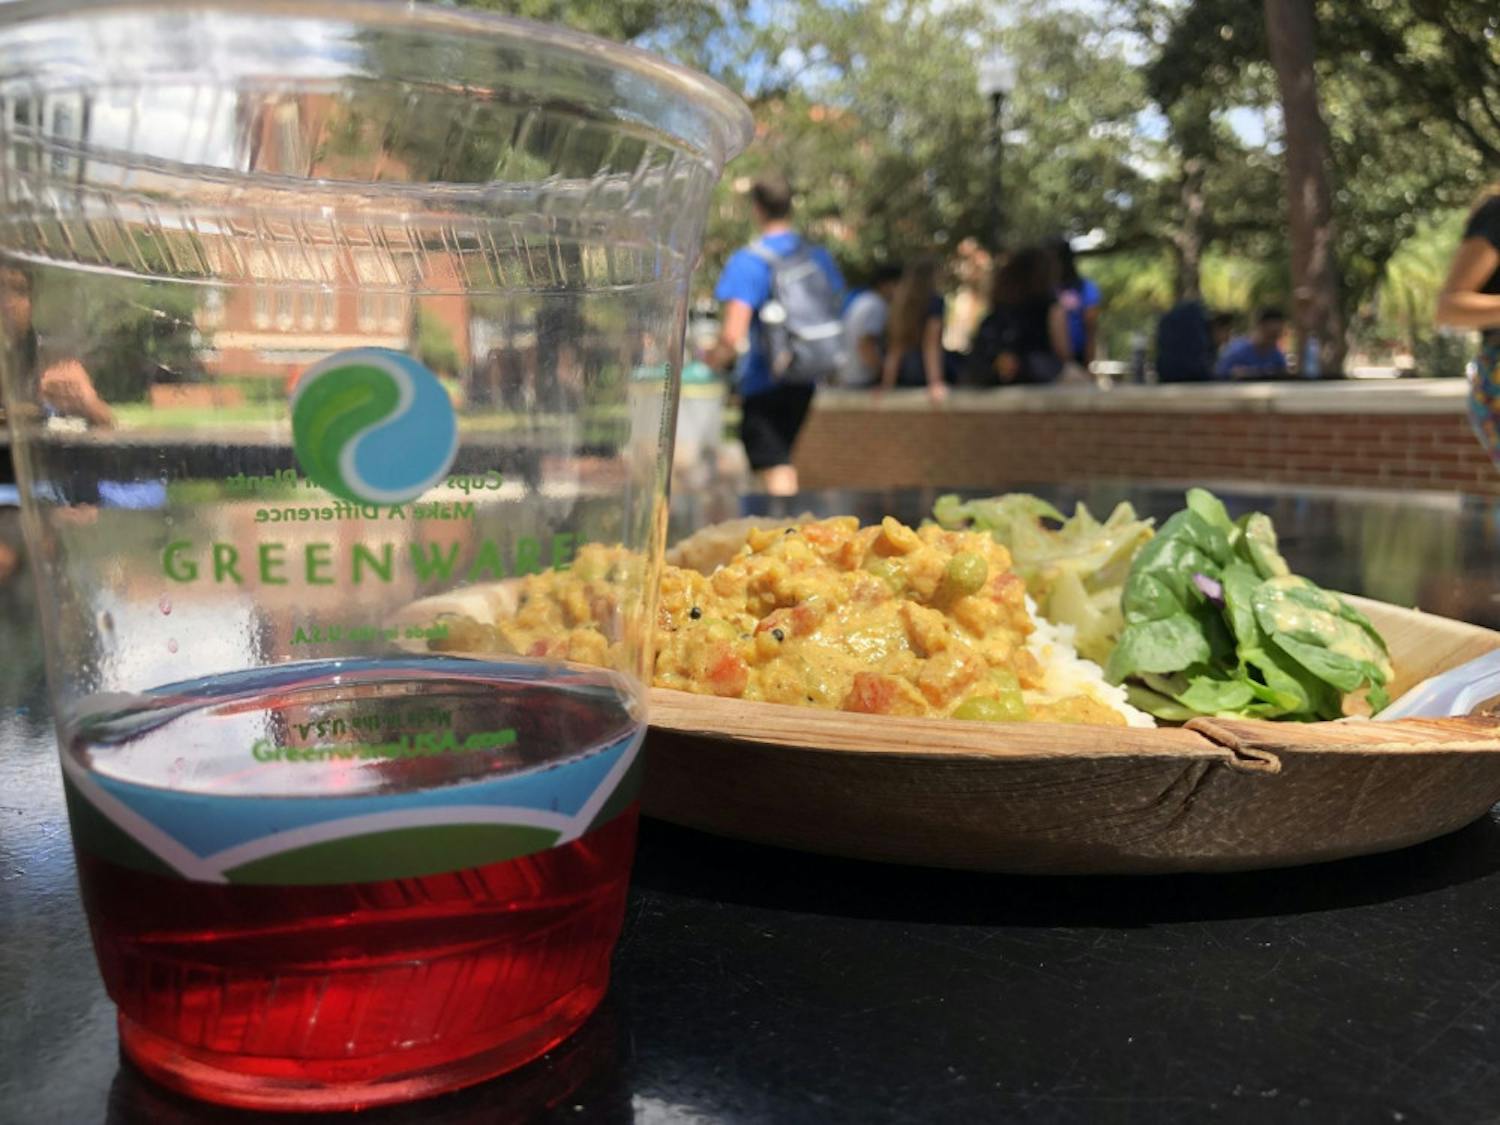 Krishna Lunch is served using all compostable materials, including cups, plates, forks and napkins. It will serve tea in plastic compost able cups until its usual paper cups are back in stock.&nbsp;